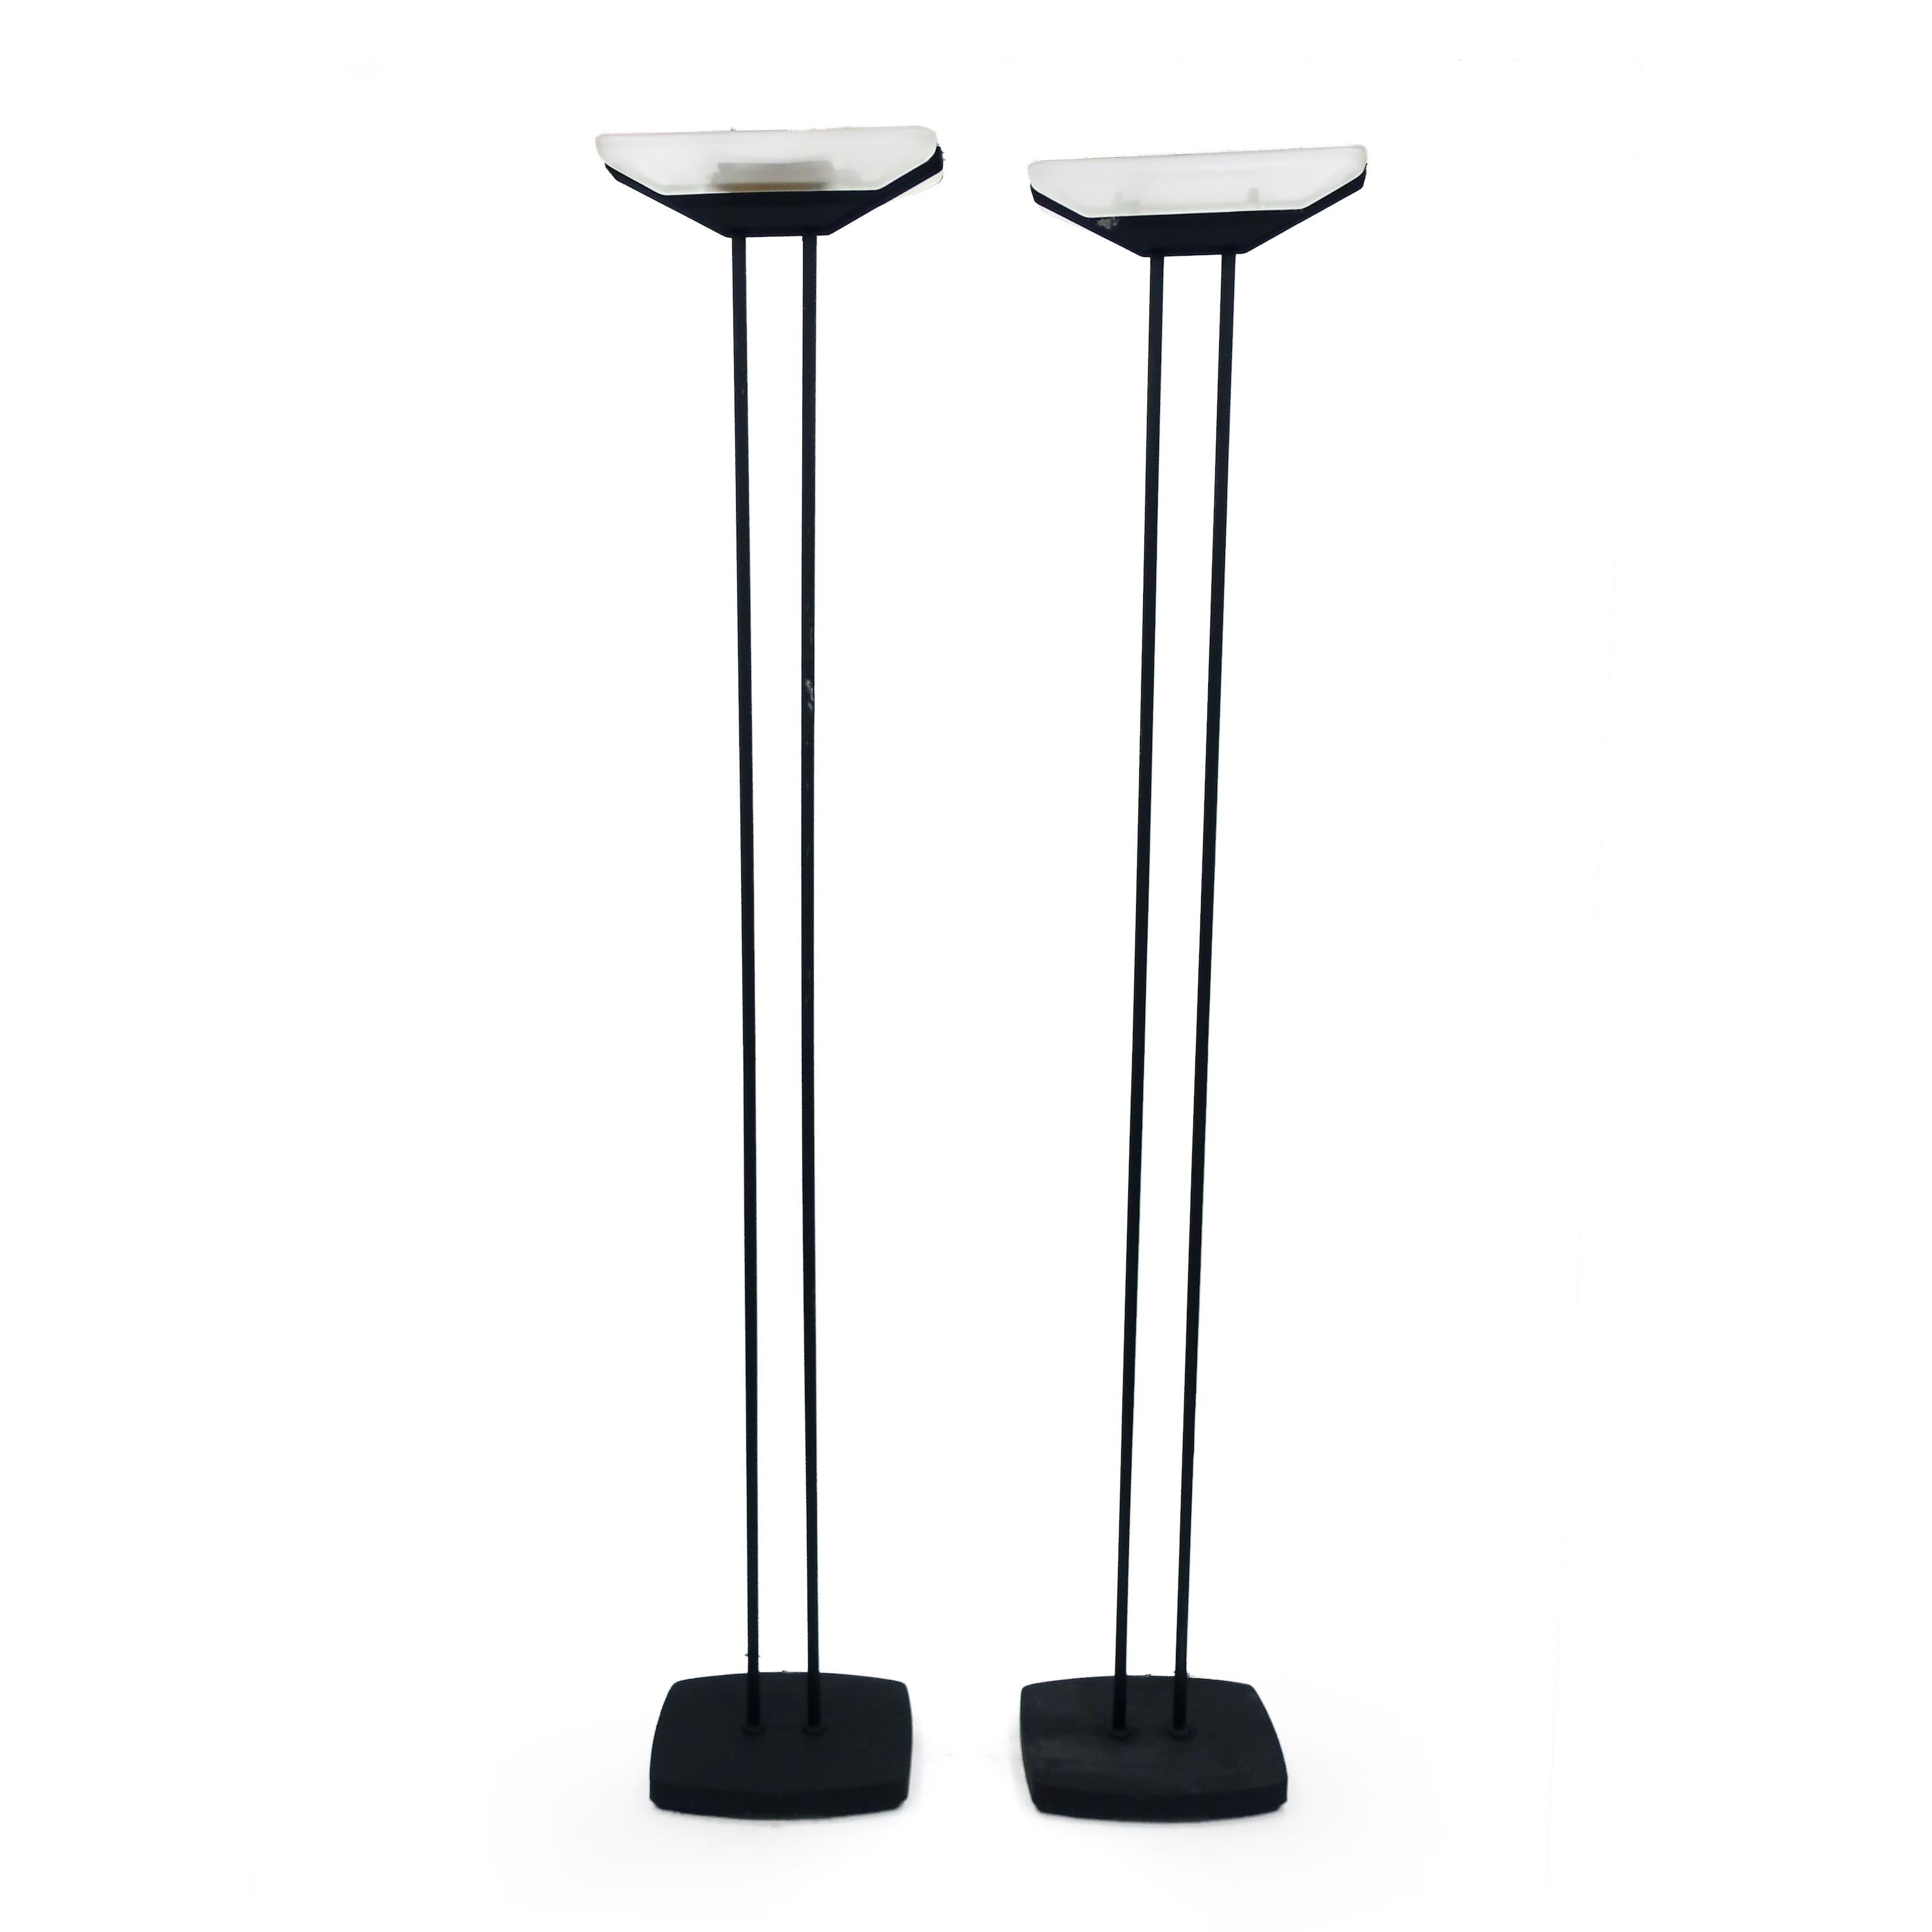 A great pair of 1980s postmodern floor lamps in black enameled metal attributed to Raul Barbieri and Giorgio Marianelli for Tronconi Illuminazione.  With heavy cast metal bases and two metal columns that support a rectangular glass shade, the lamp's